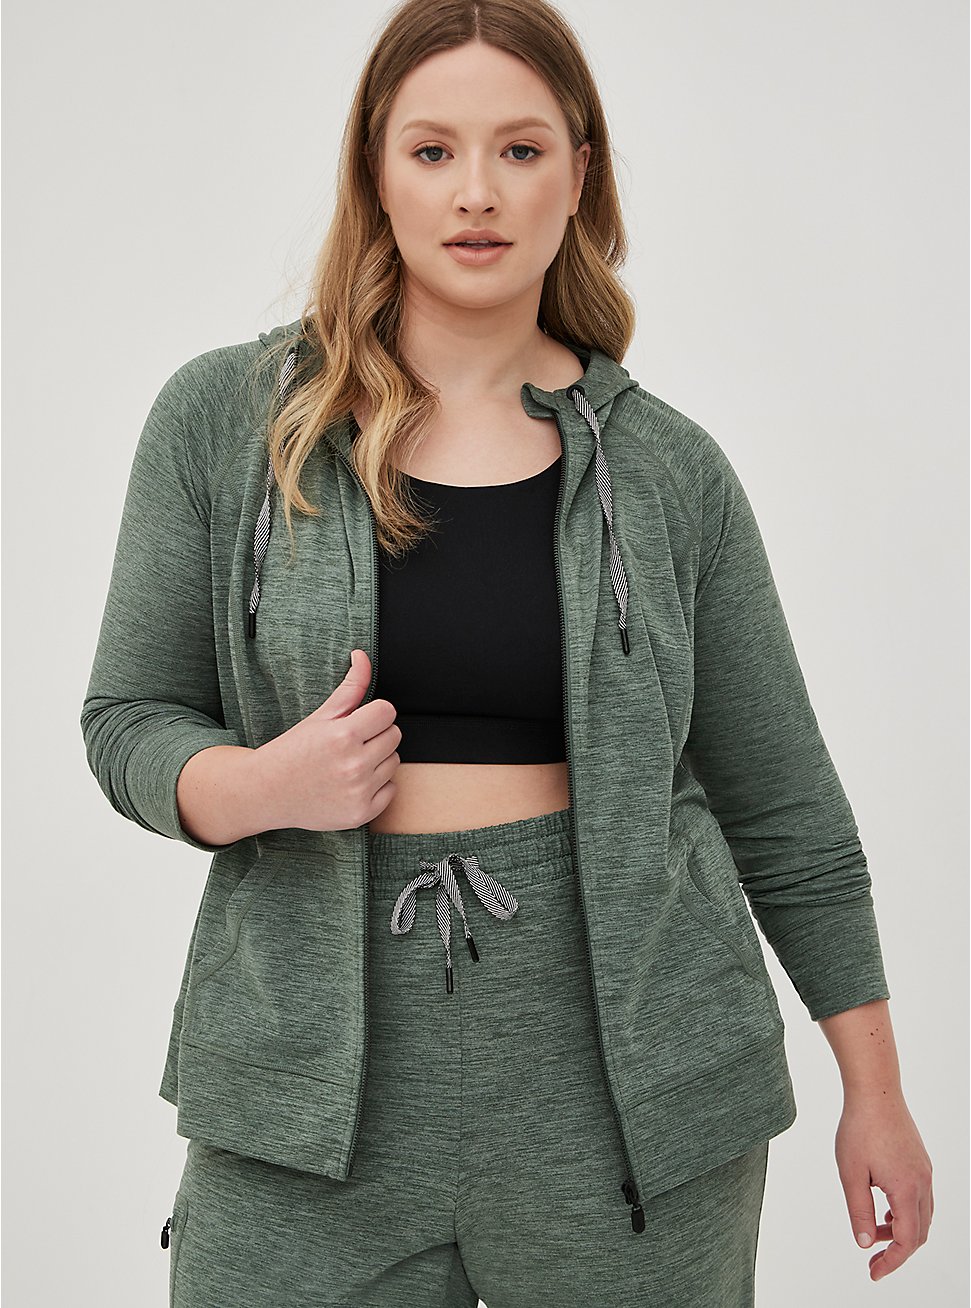 Plus Size Happy Camper Zip Front Hoodie - Super Soft Performance Jersey Green, FOREST, hi-res